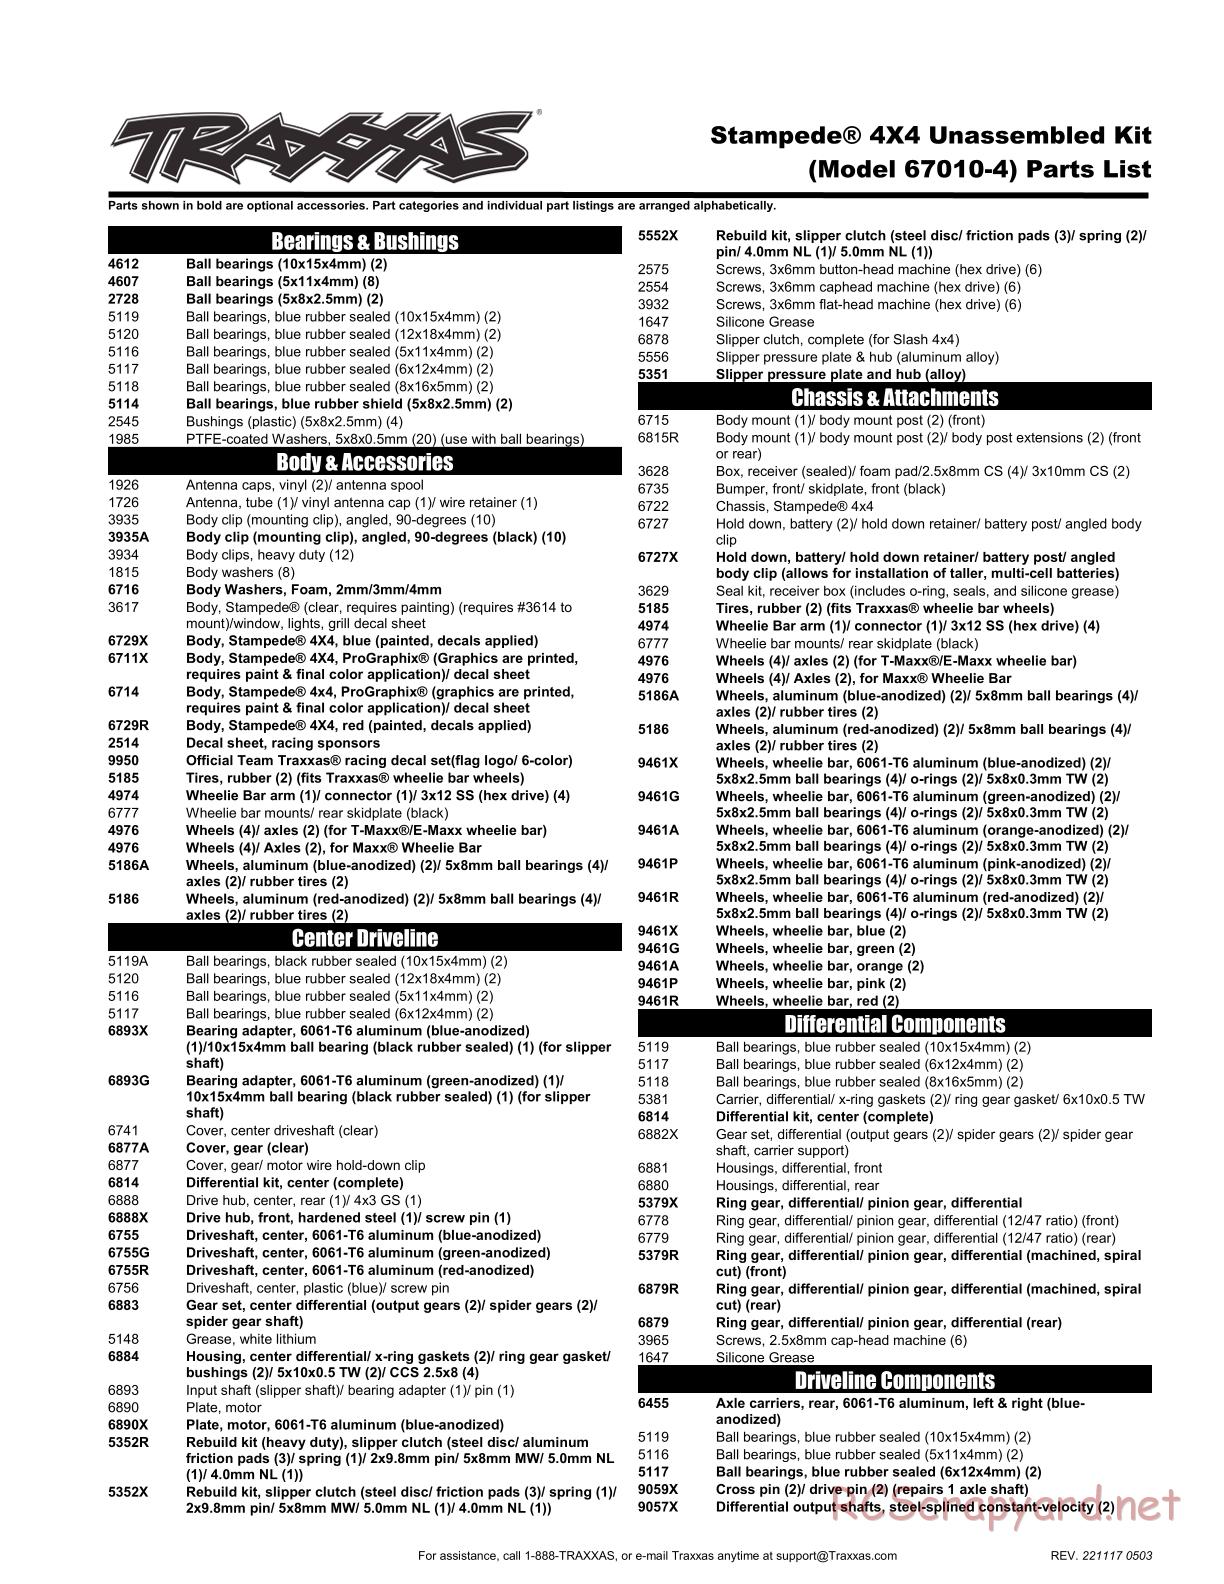 Traxxas - Stampede 4x4 (2019) - Parts List - Page 1